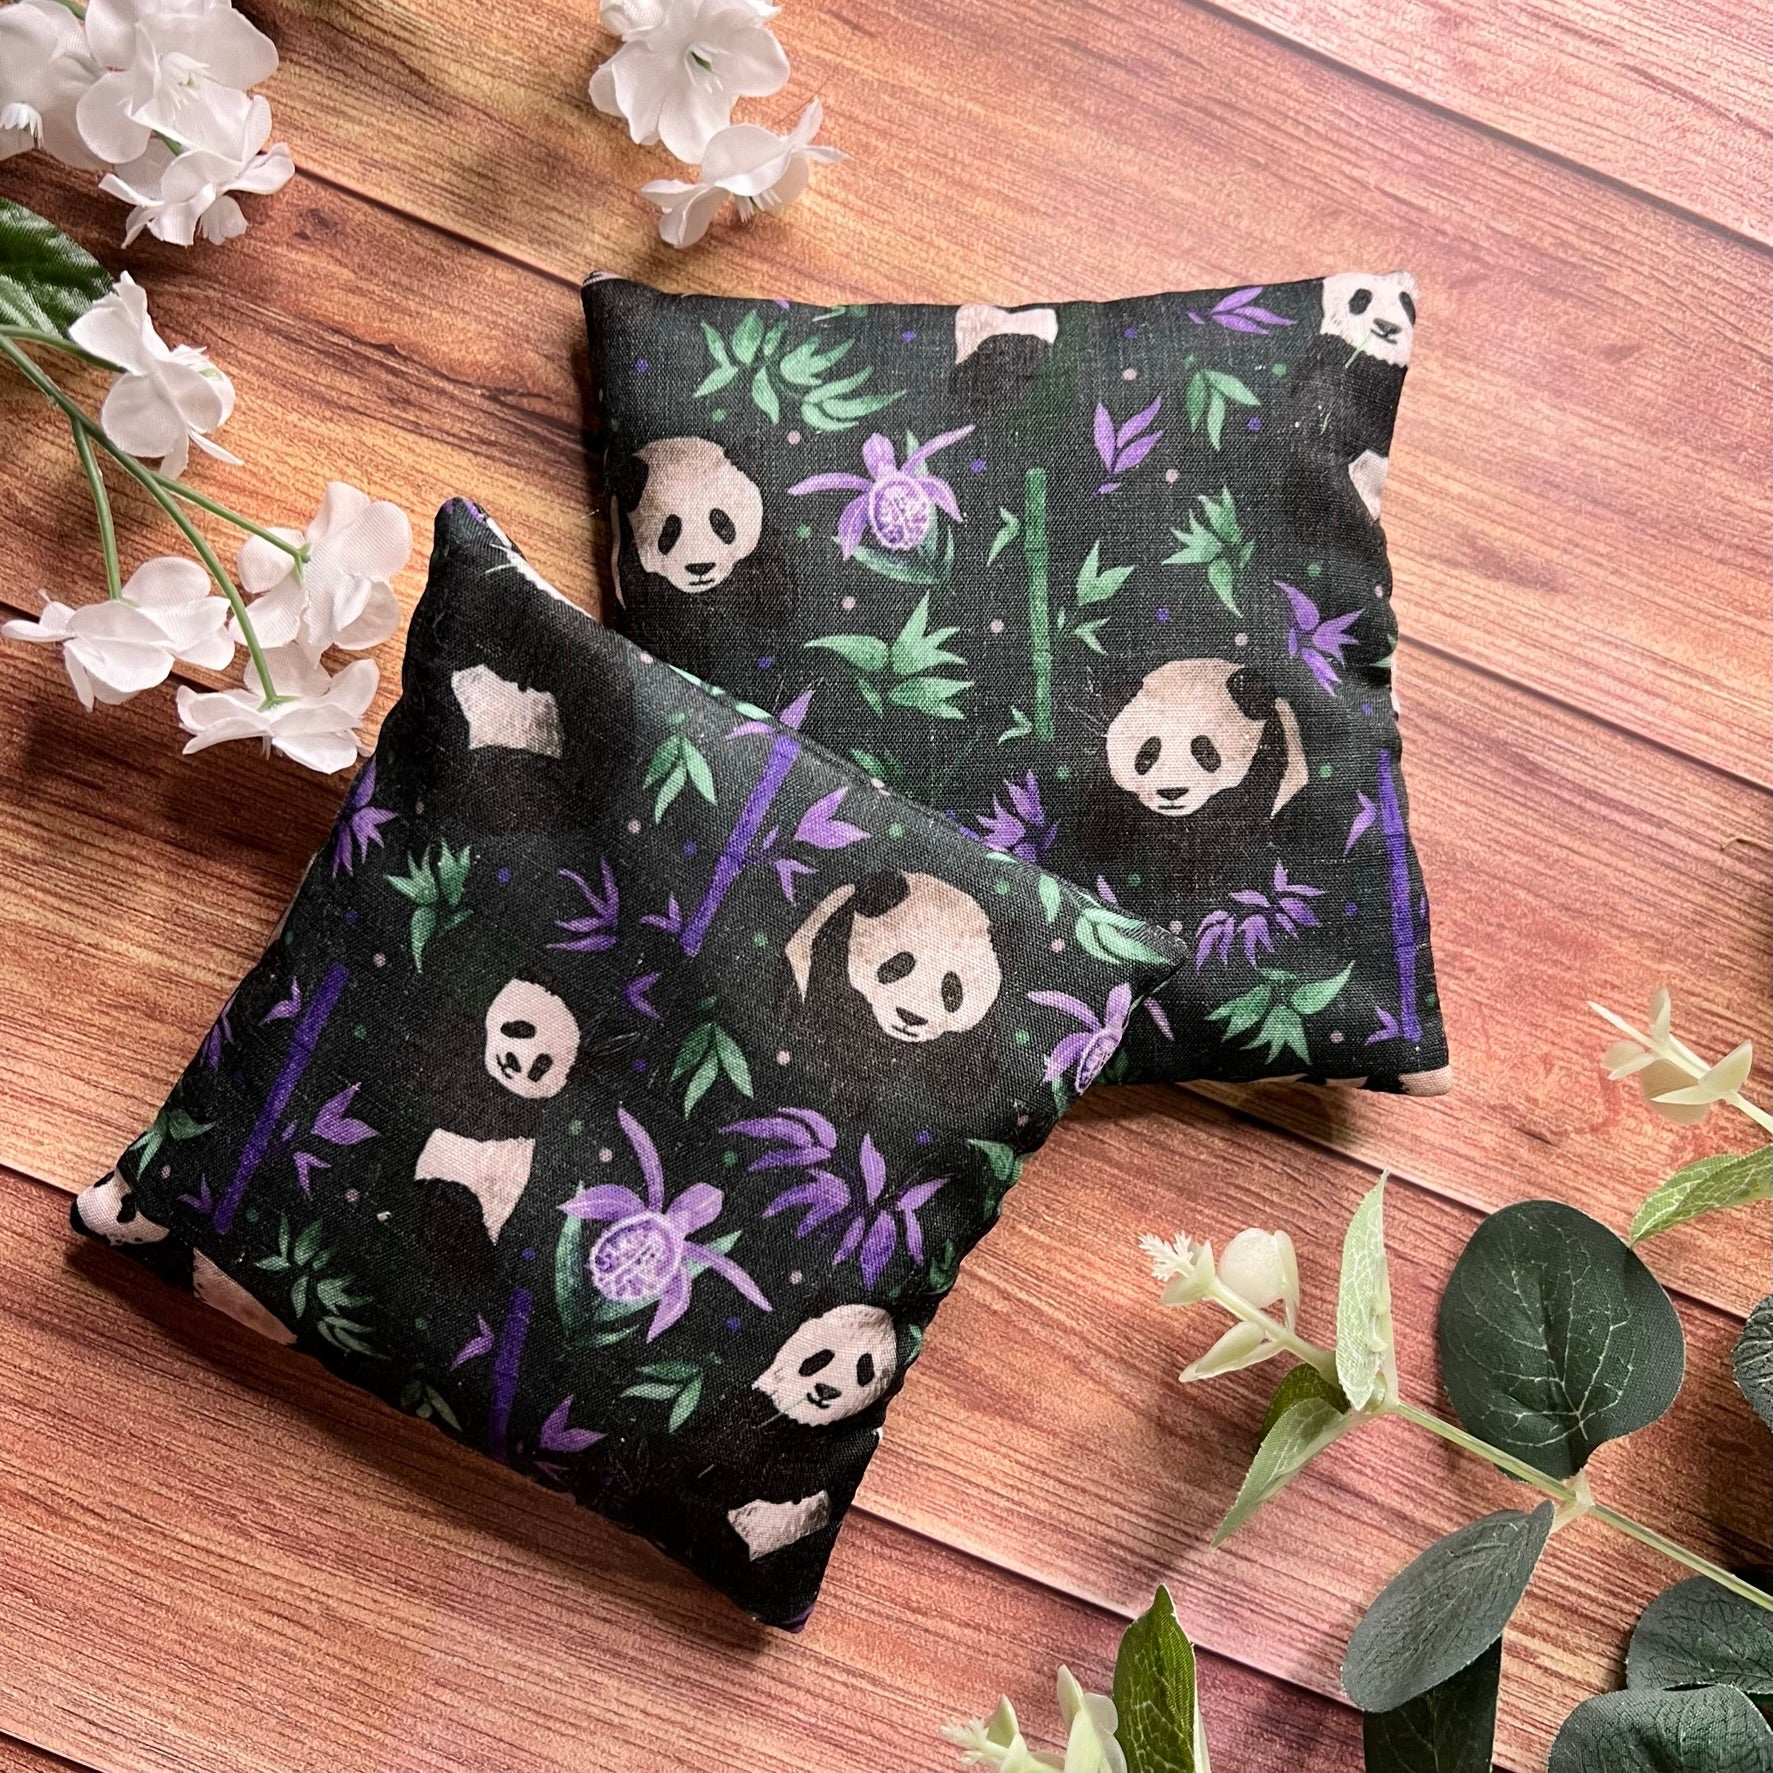 Enjoy a hand warmers gift set with this cute panda christmas gift, these hand warmrs are dark purple and ideal for those with cold hands.